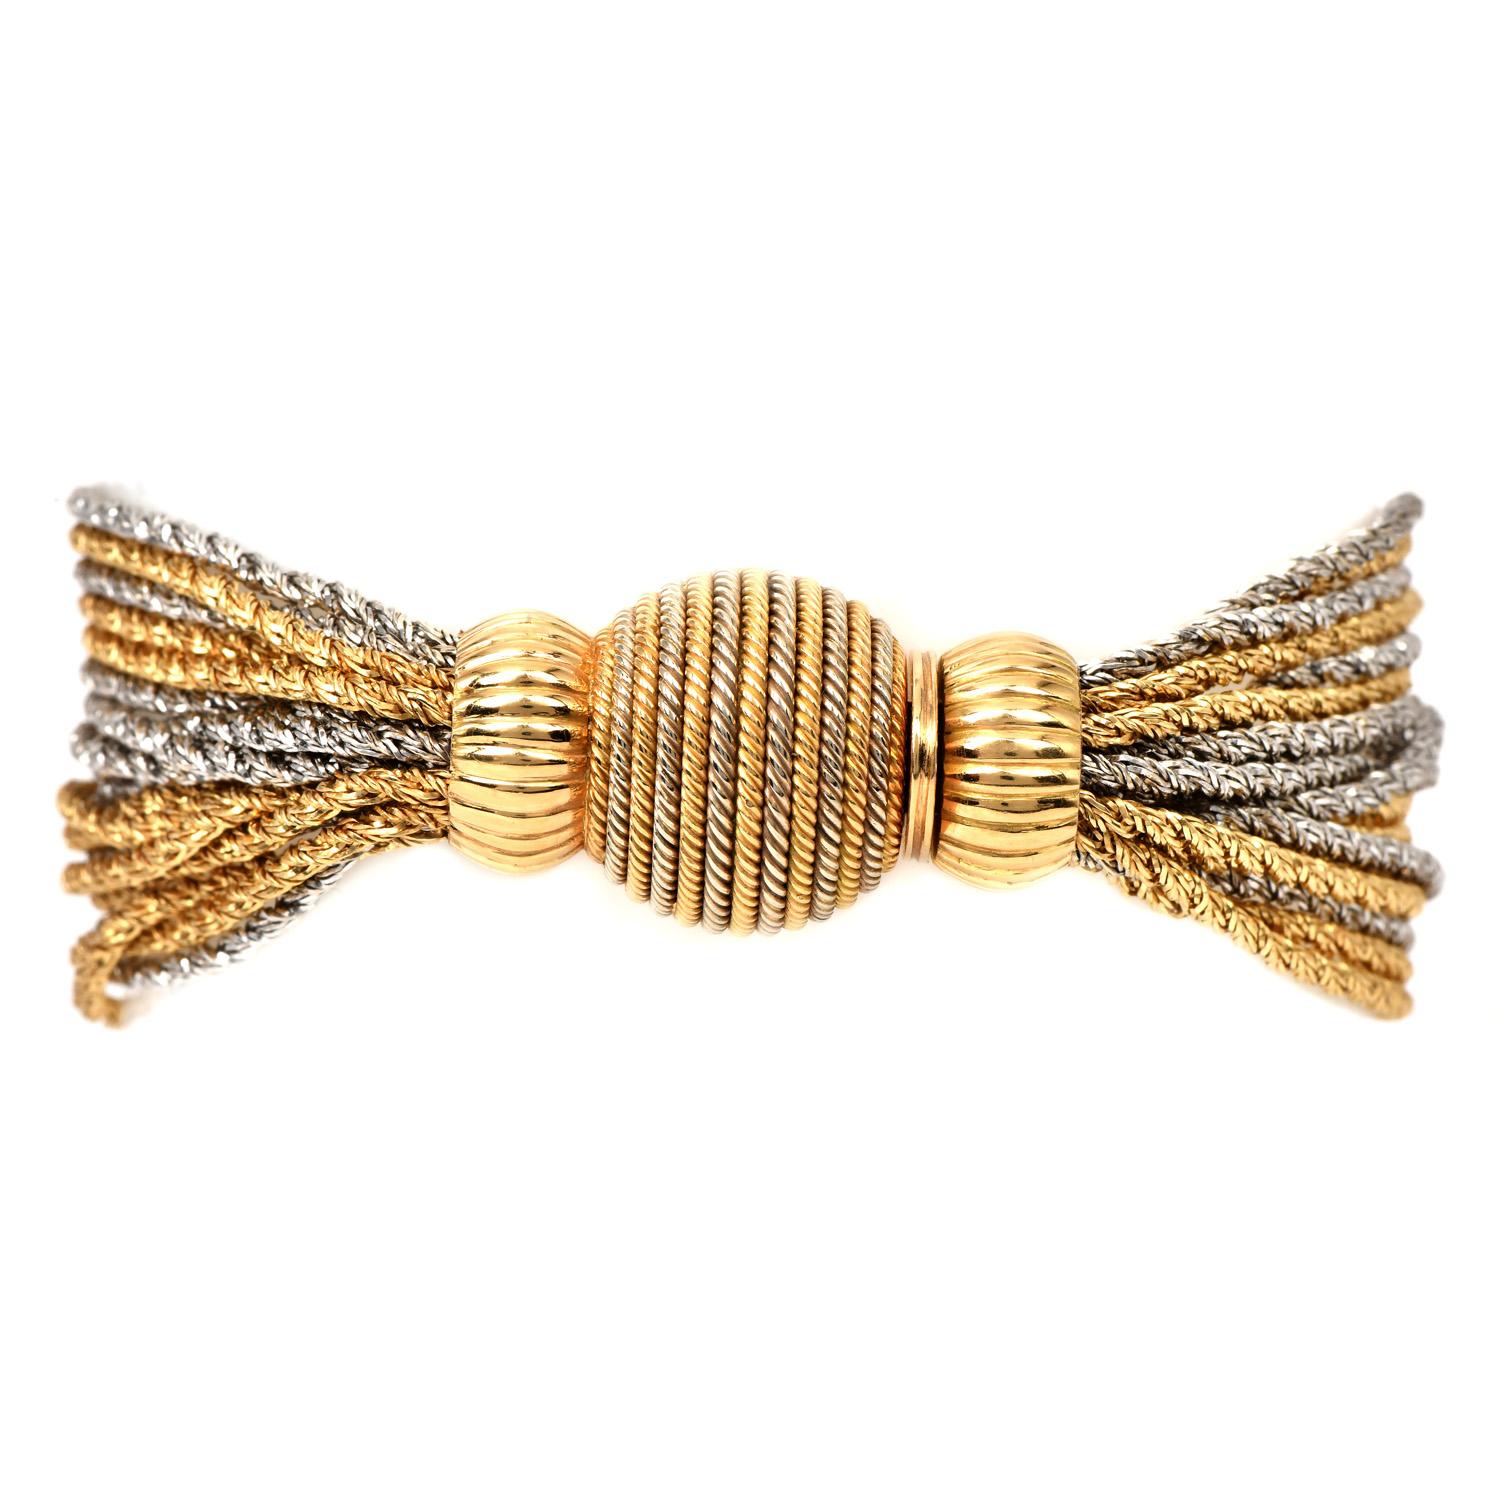 Late 1970s Vintage Bracelet with a multi-rope strand design, in a highly polished gold finish. 

Crafted in solid 18K yellow & white gold, the strand link bracelet is finely made and finished in bead design insert clasp.

The complete piece weighs